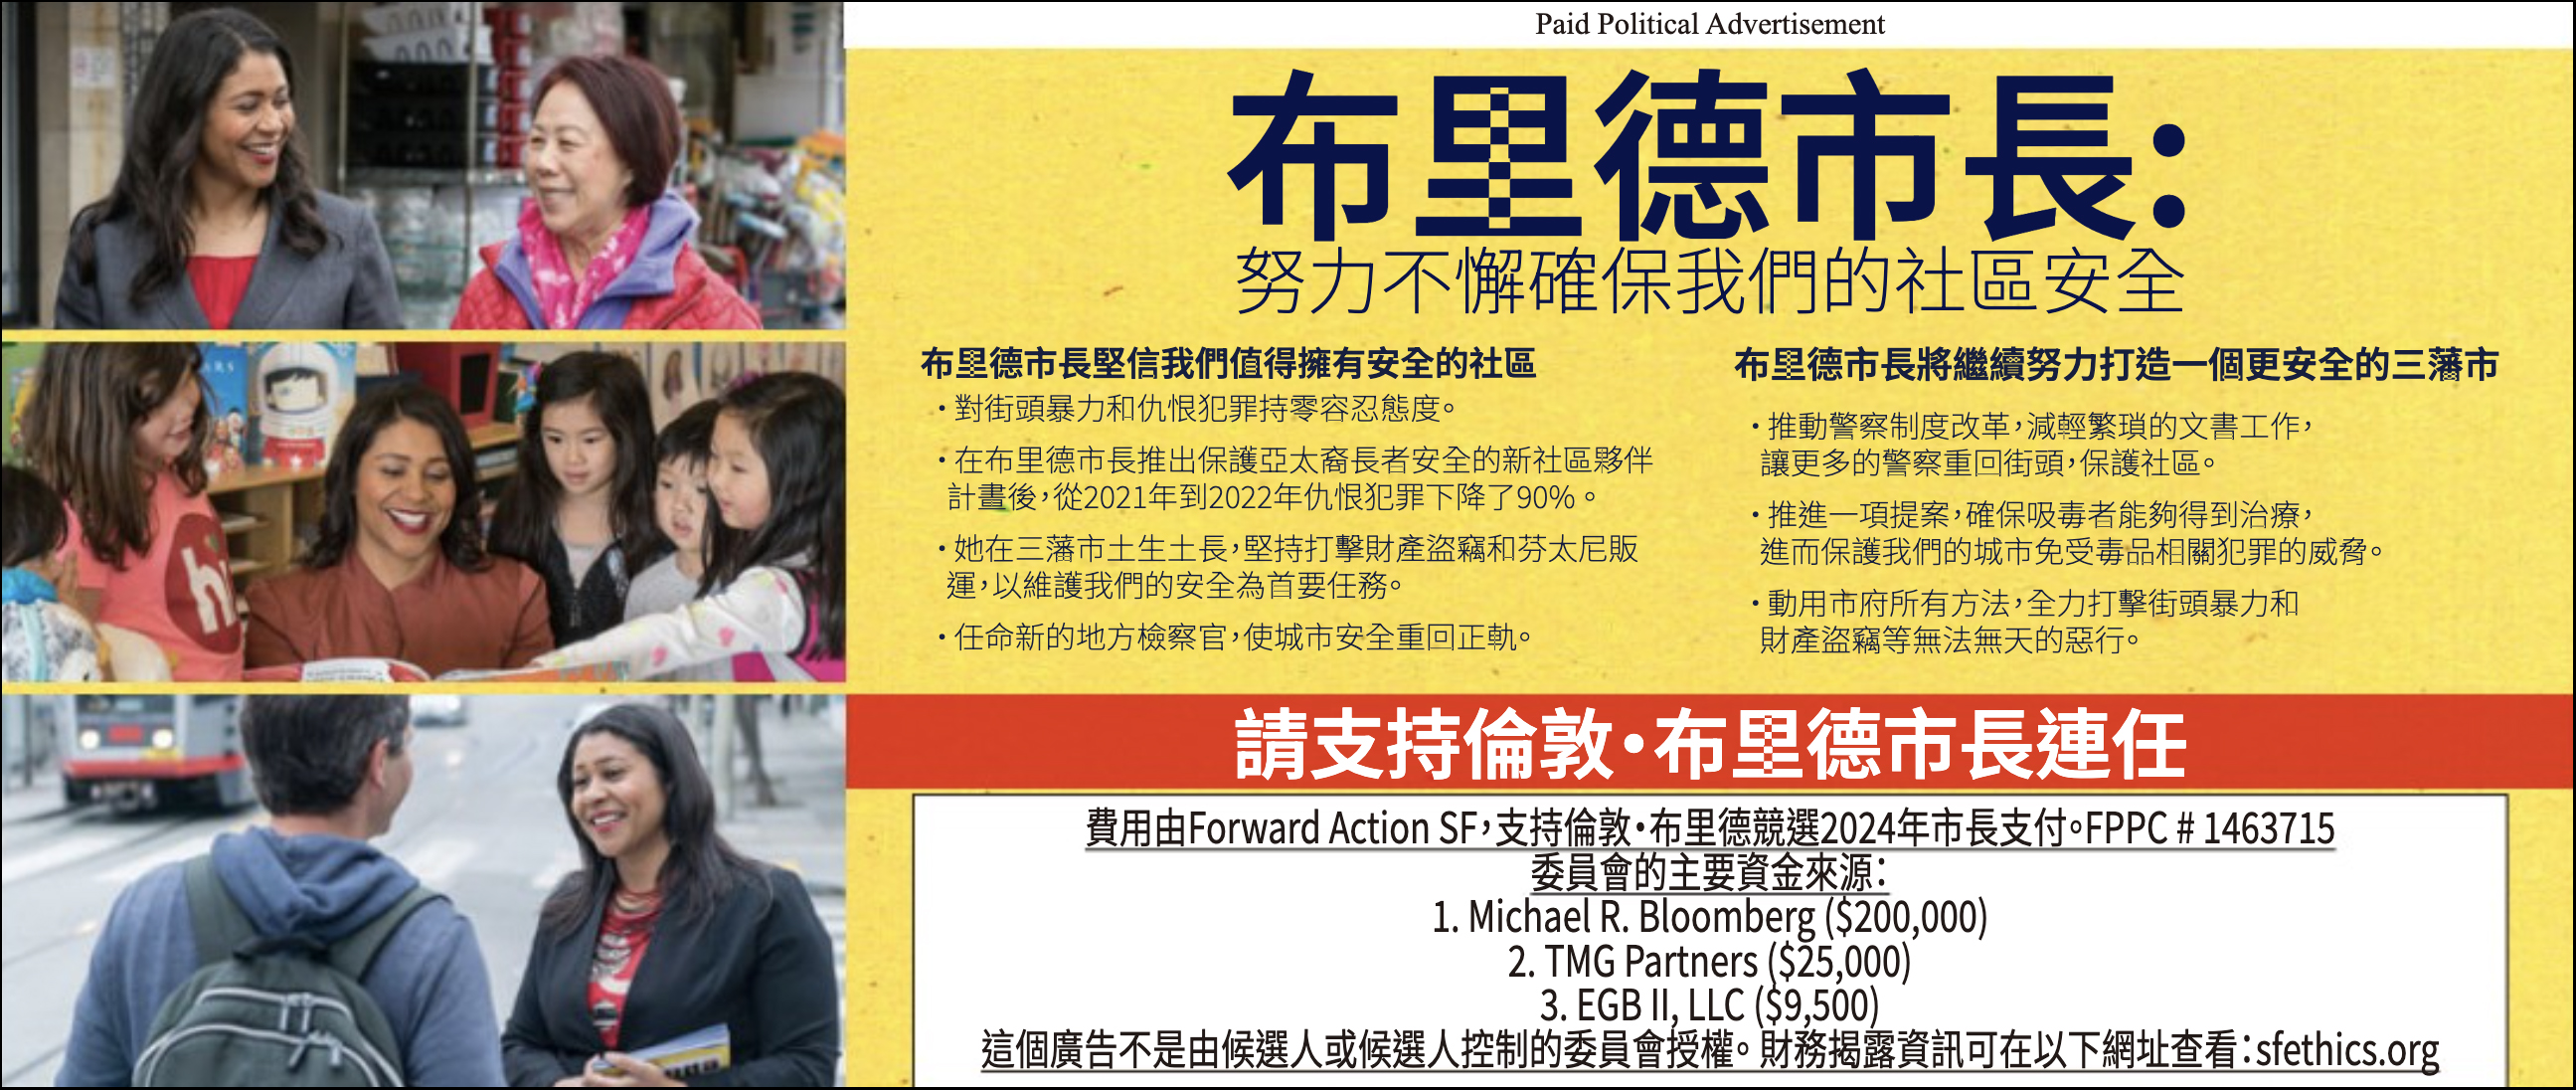 The image is a political advertisement with photos and Chinese text. There are three photos of a woman interacting with various people, including children, and a section disclosing campaign contributors.